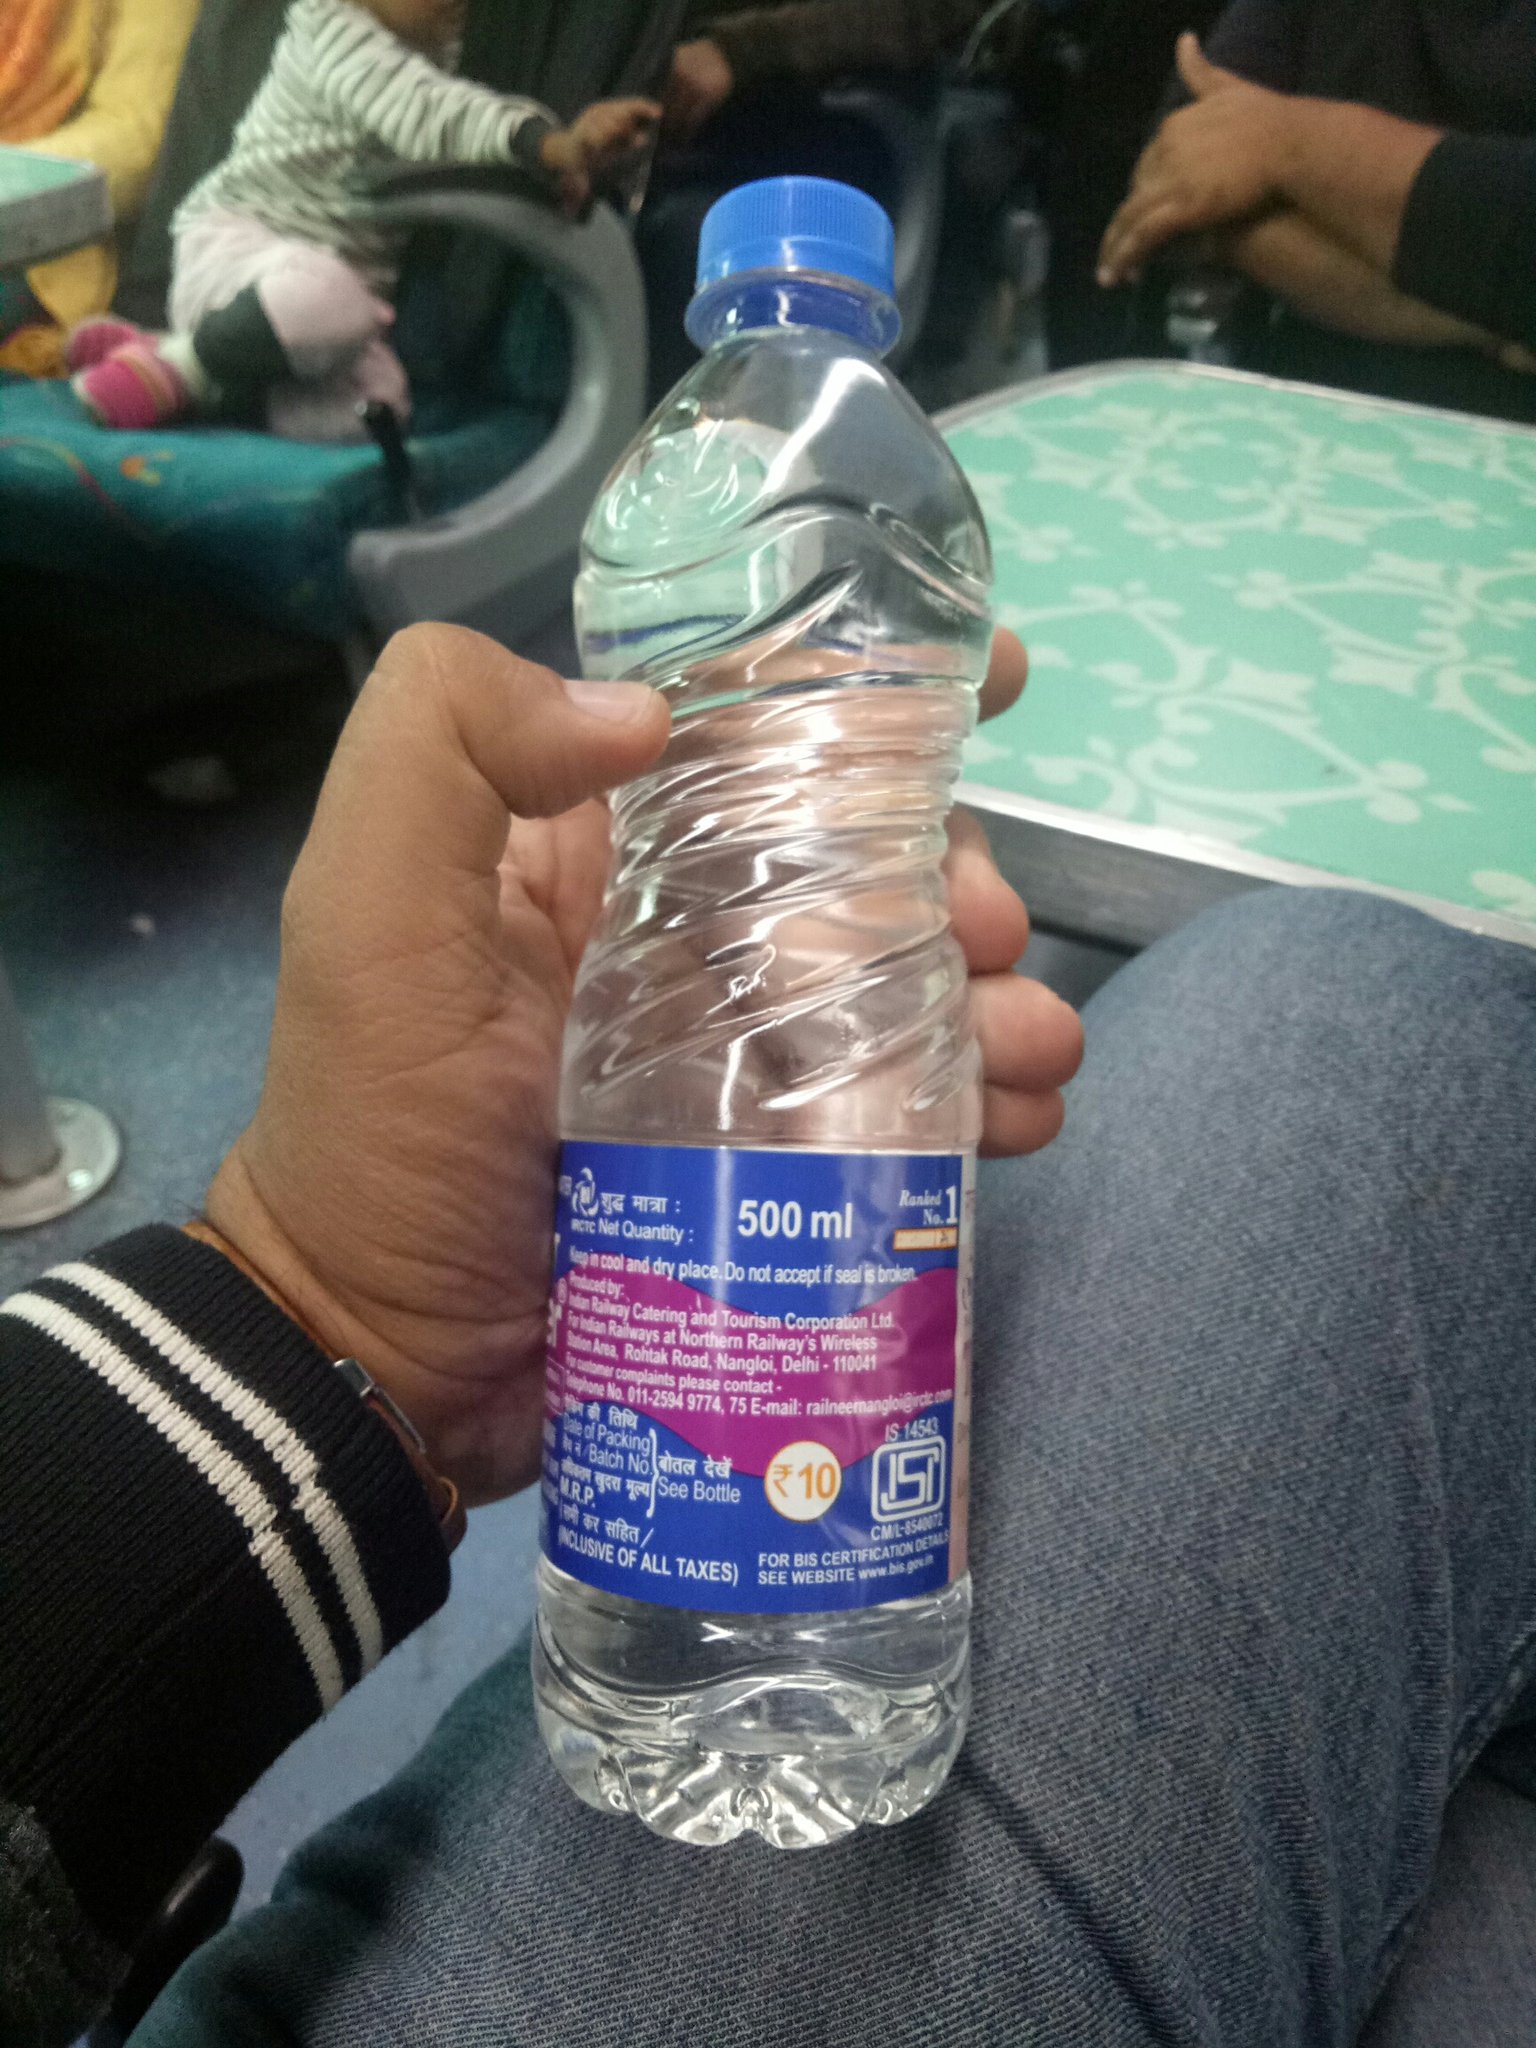 IRCTC contractor fined Rs 1 lakh by Railways for charging Rs 5 extra on water  bottle - India Today